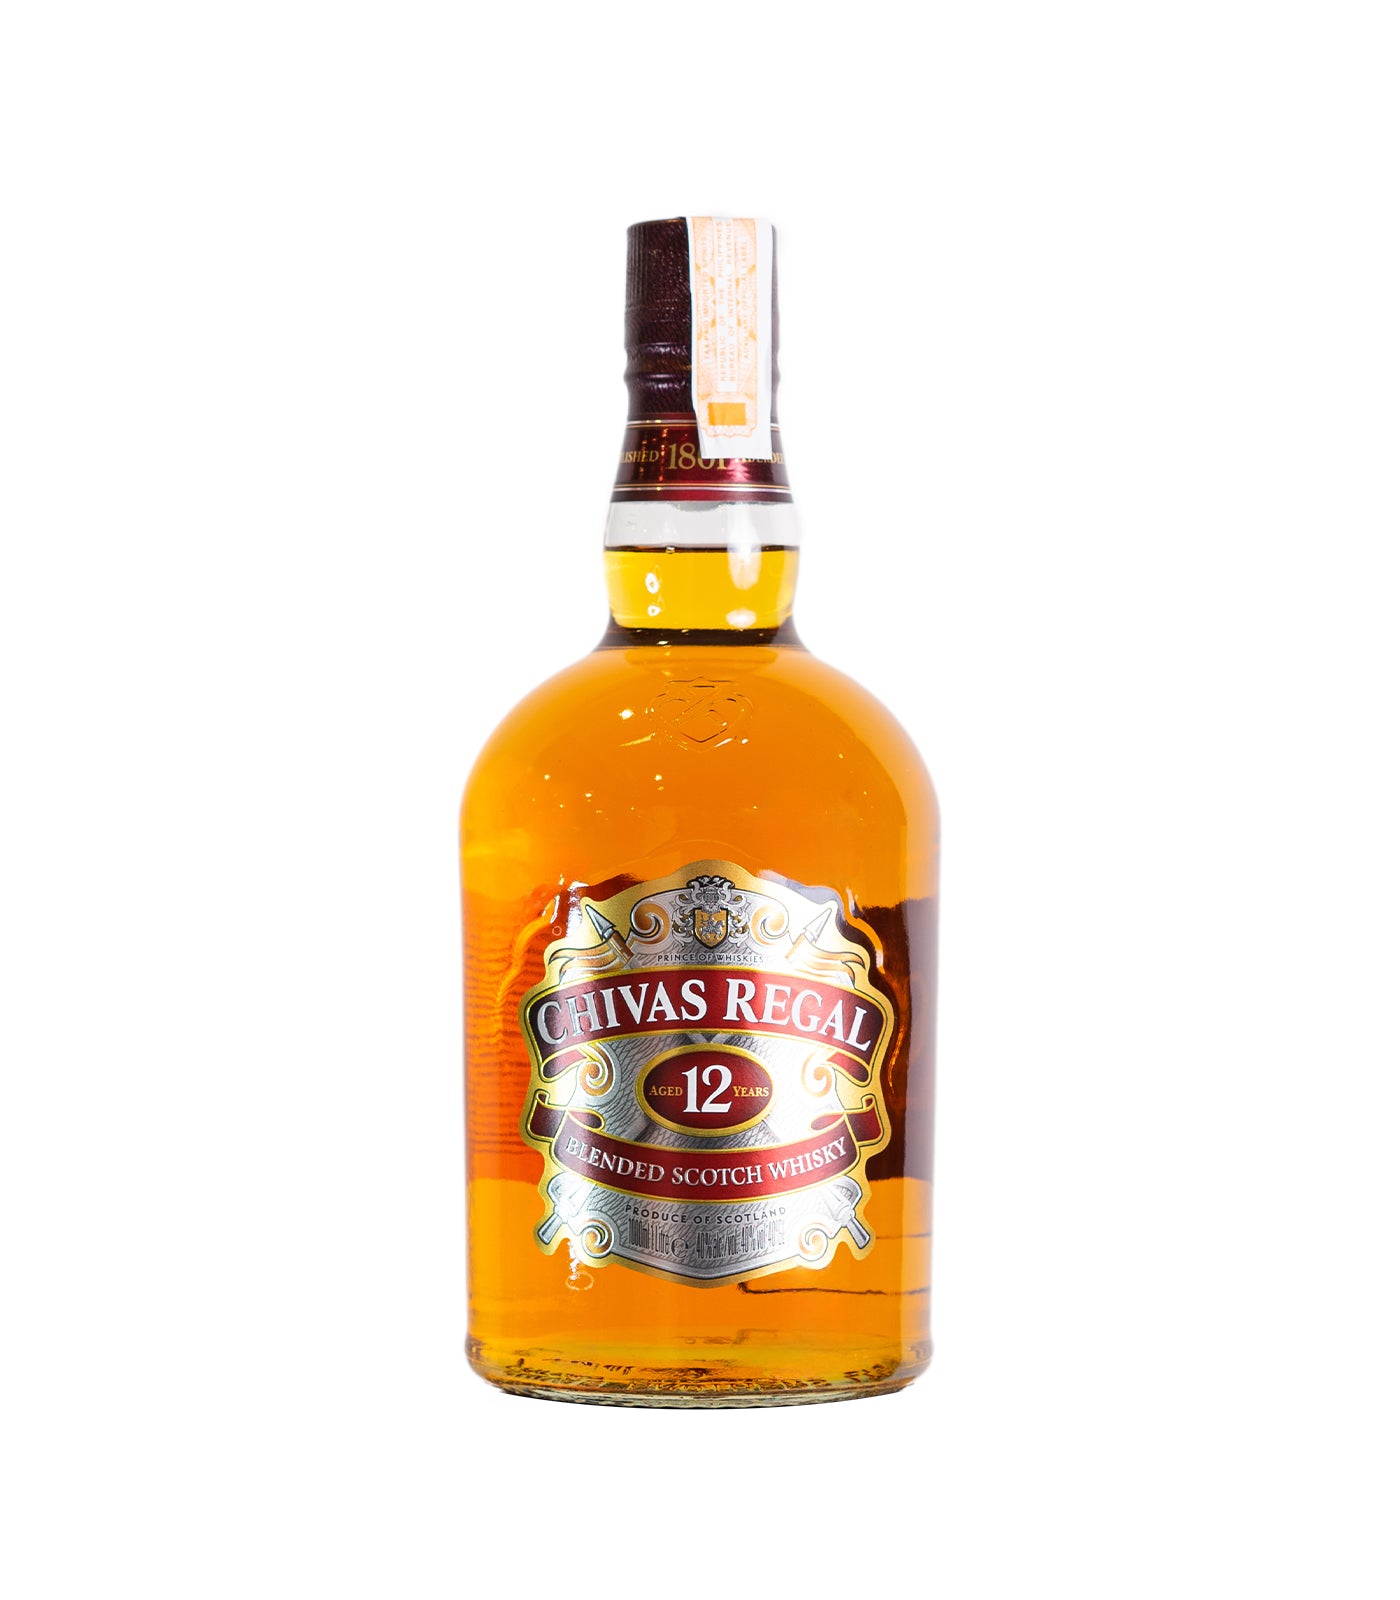 Chivas Regal 12 Year Old Blended Scotch Whisky (40%ABV)